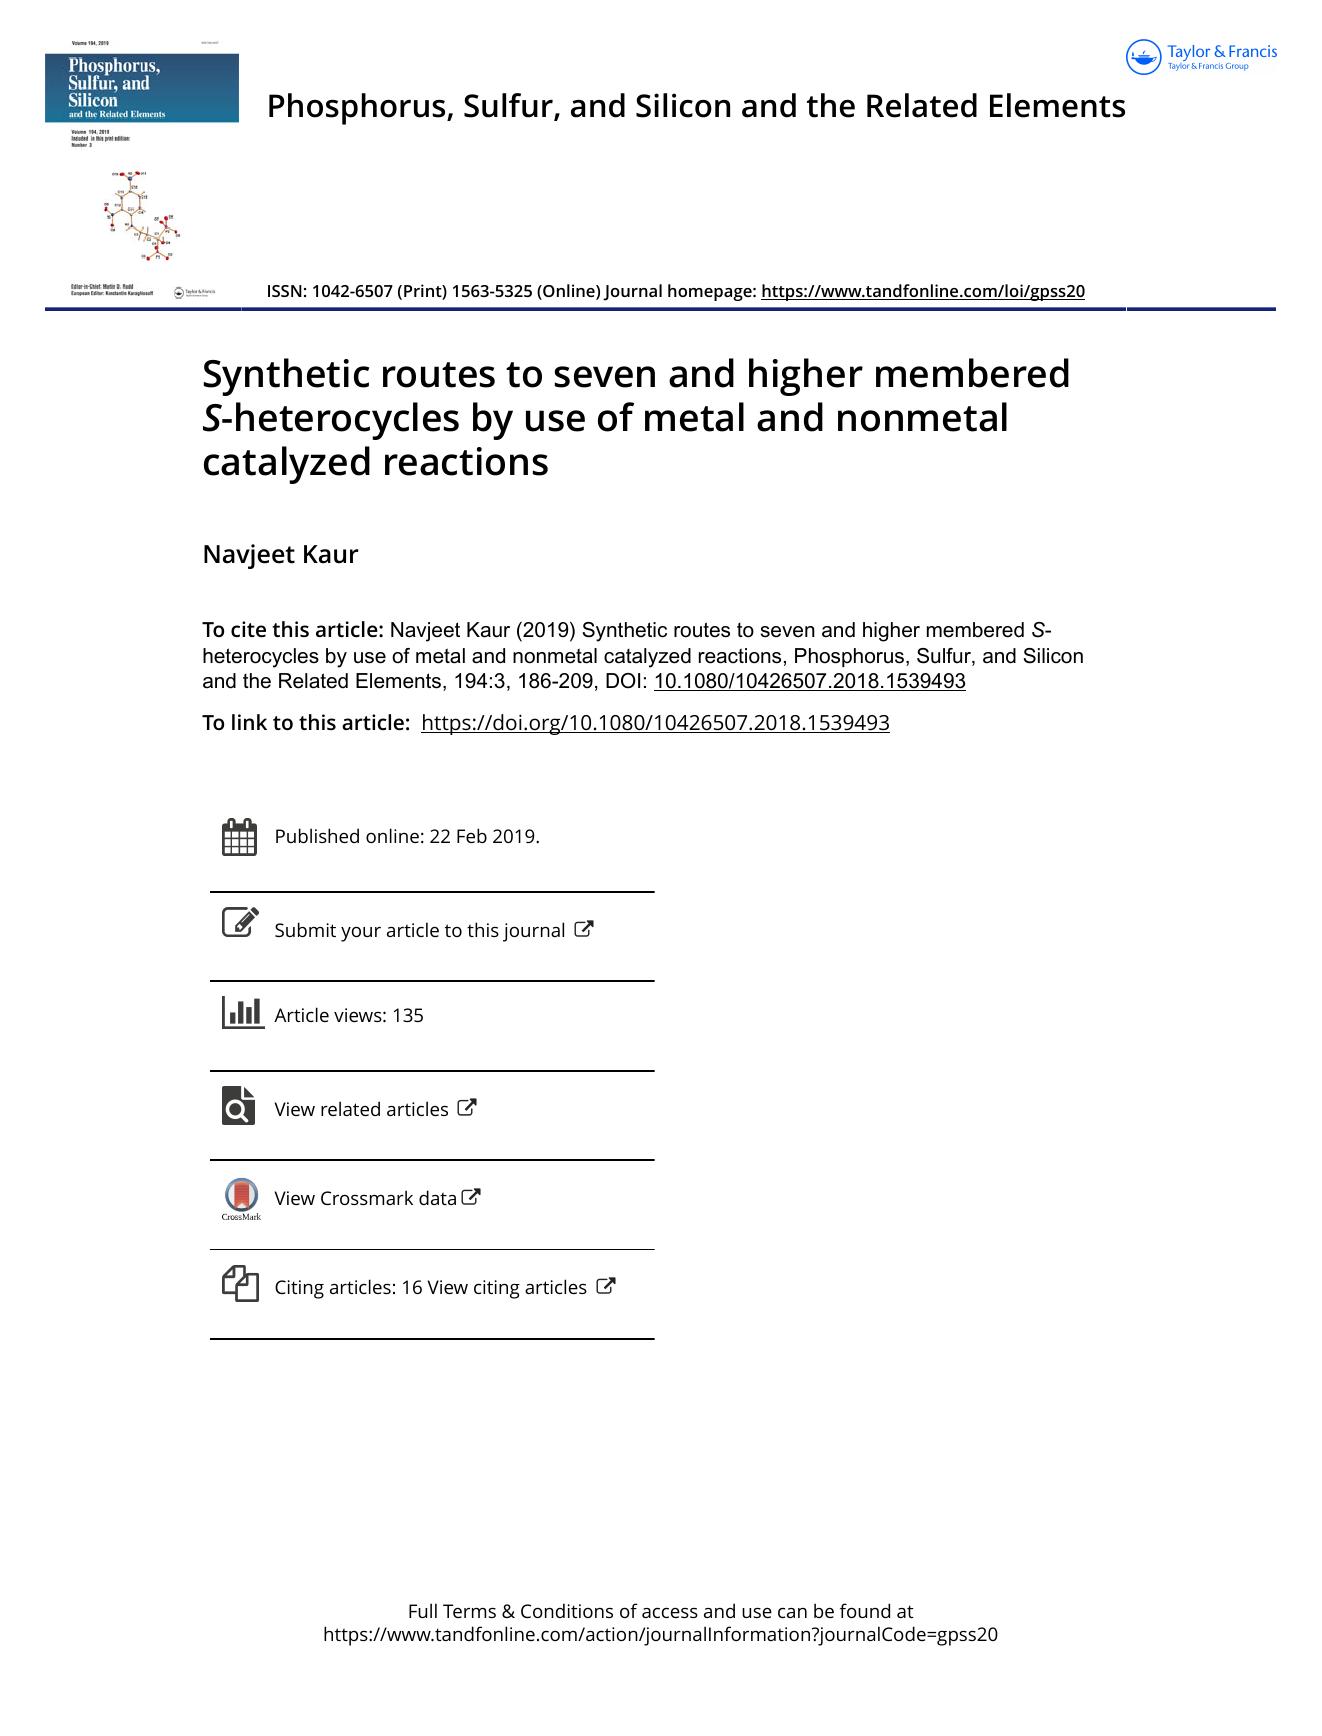 Synthetic routes to seven and higher membered S-heterocycles by use of metal and nonmetal catalyzed reactions by Kaur Navjeet